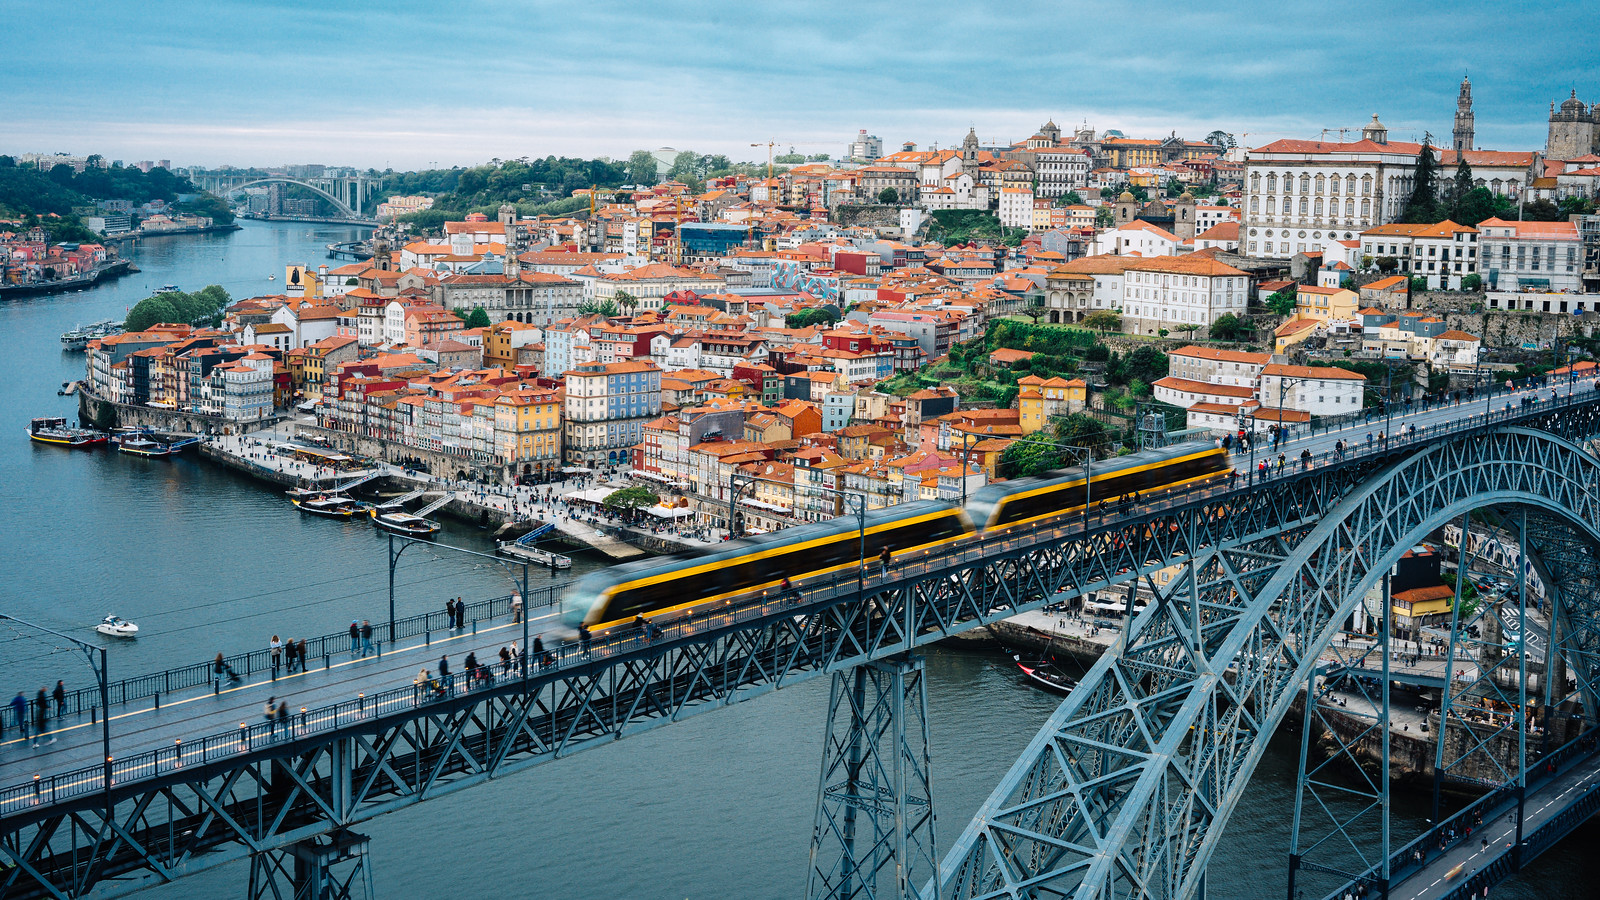 Iconic Dom Luís I Bridge with Yellow Tram Crossing Over the Bustling Porto Cityscape